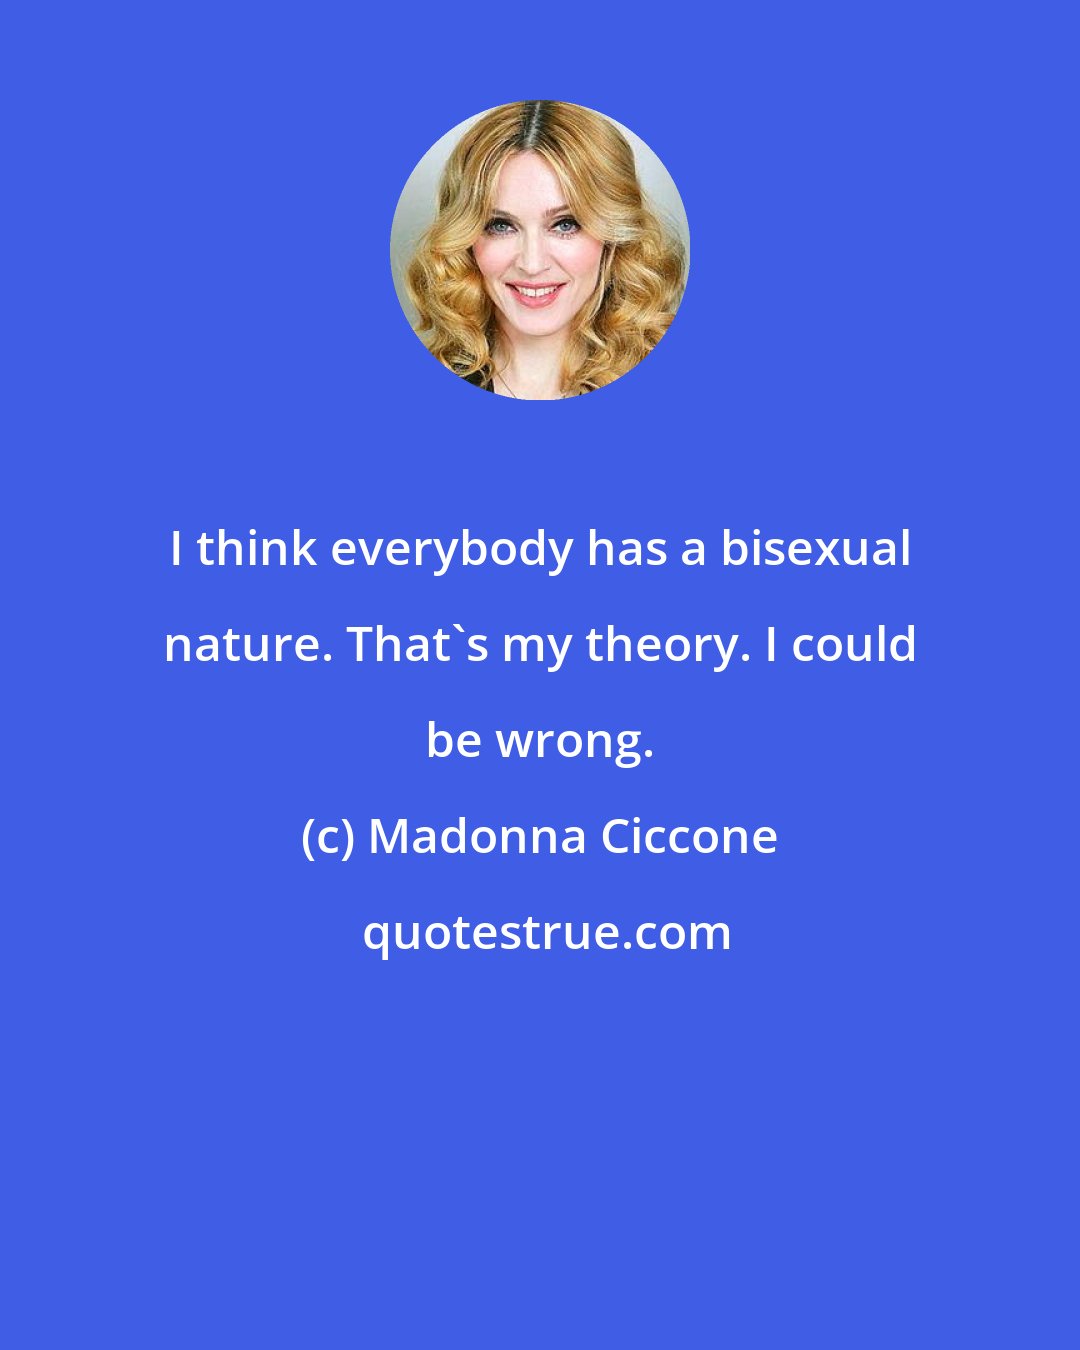 Madonna Ciccone: I think everybody has a bisexual nature. That's my theory. I could be wrong.